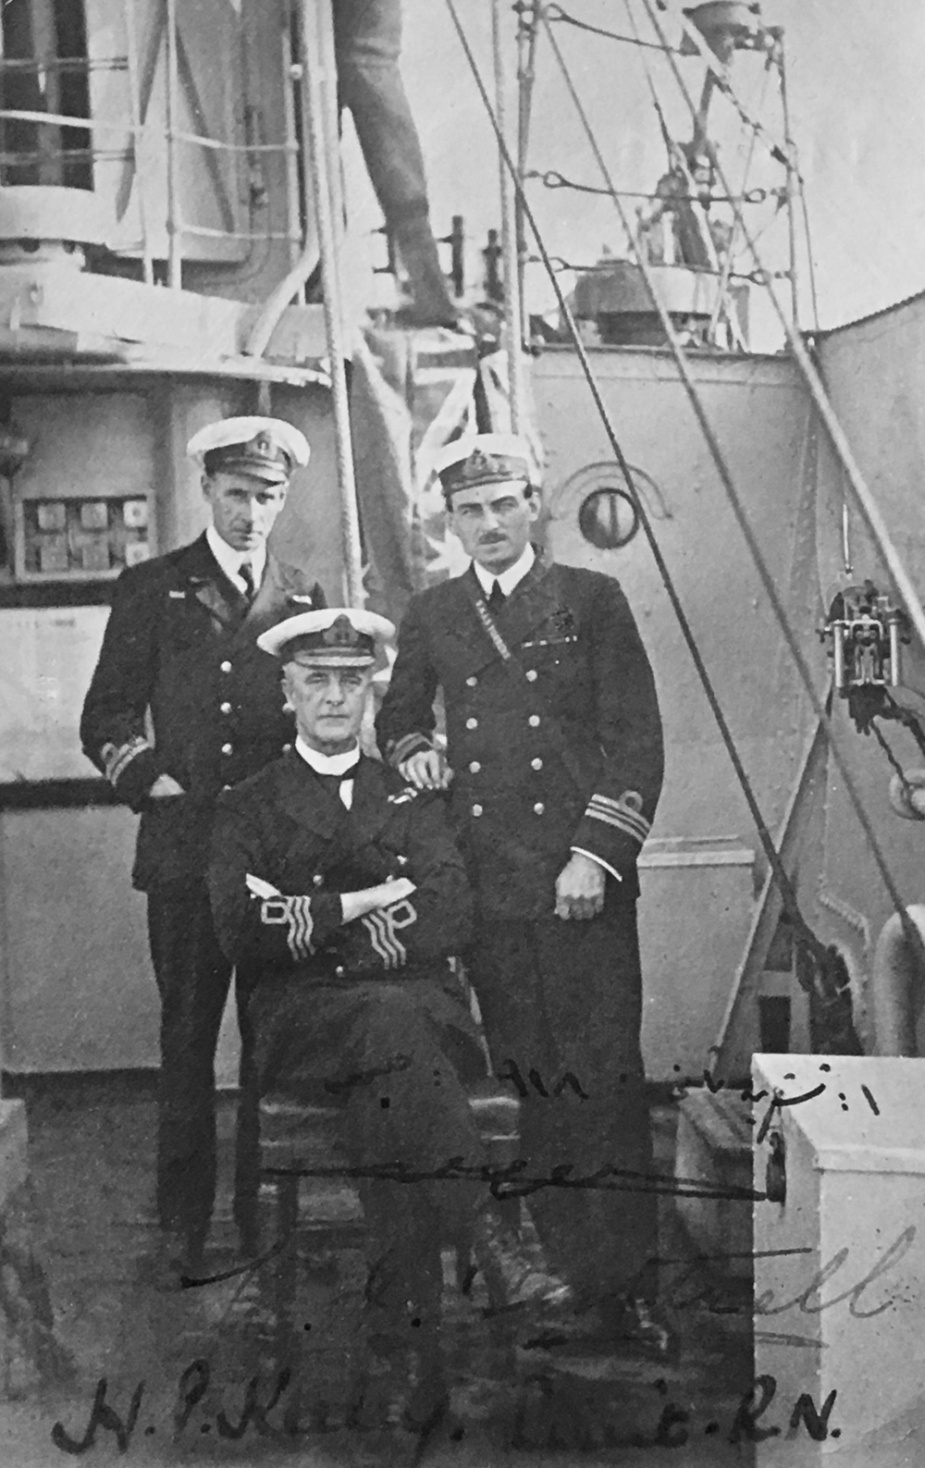 Lieutenant Harold Keeley, DSC, RN (Commanding Officer of HMAS Torrens), Commander William Cottrell, RNVR (seated) and Prince Tuvic Bey on board Torrens at the port of Cesme, Turkey on 1 November 1918 where the Turkish forces located in that port formally surrendered to the Allies.